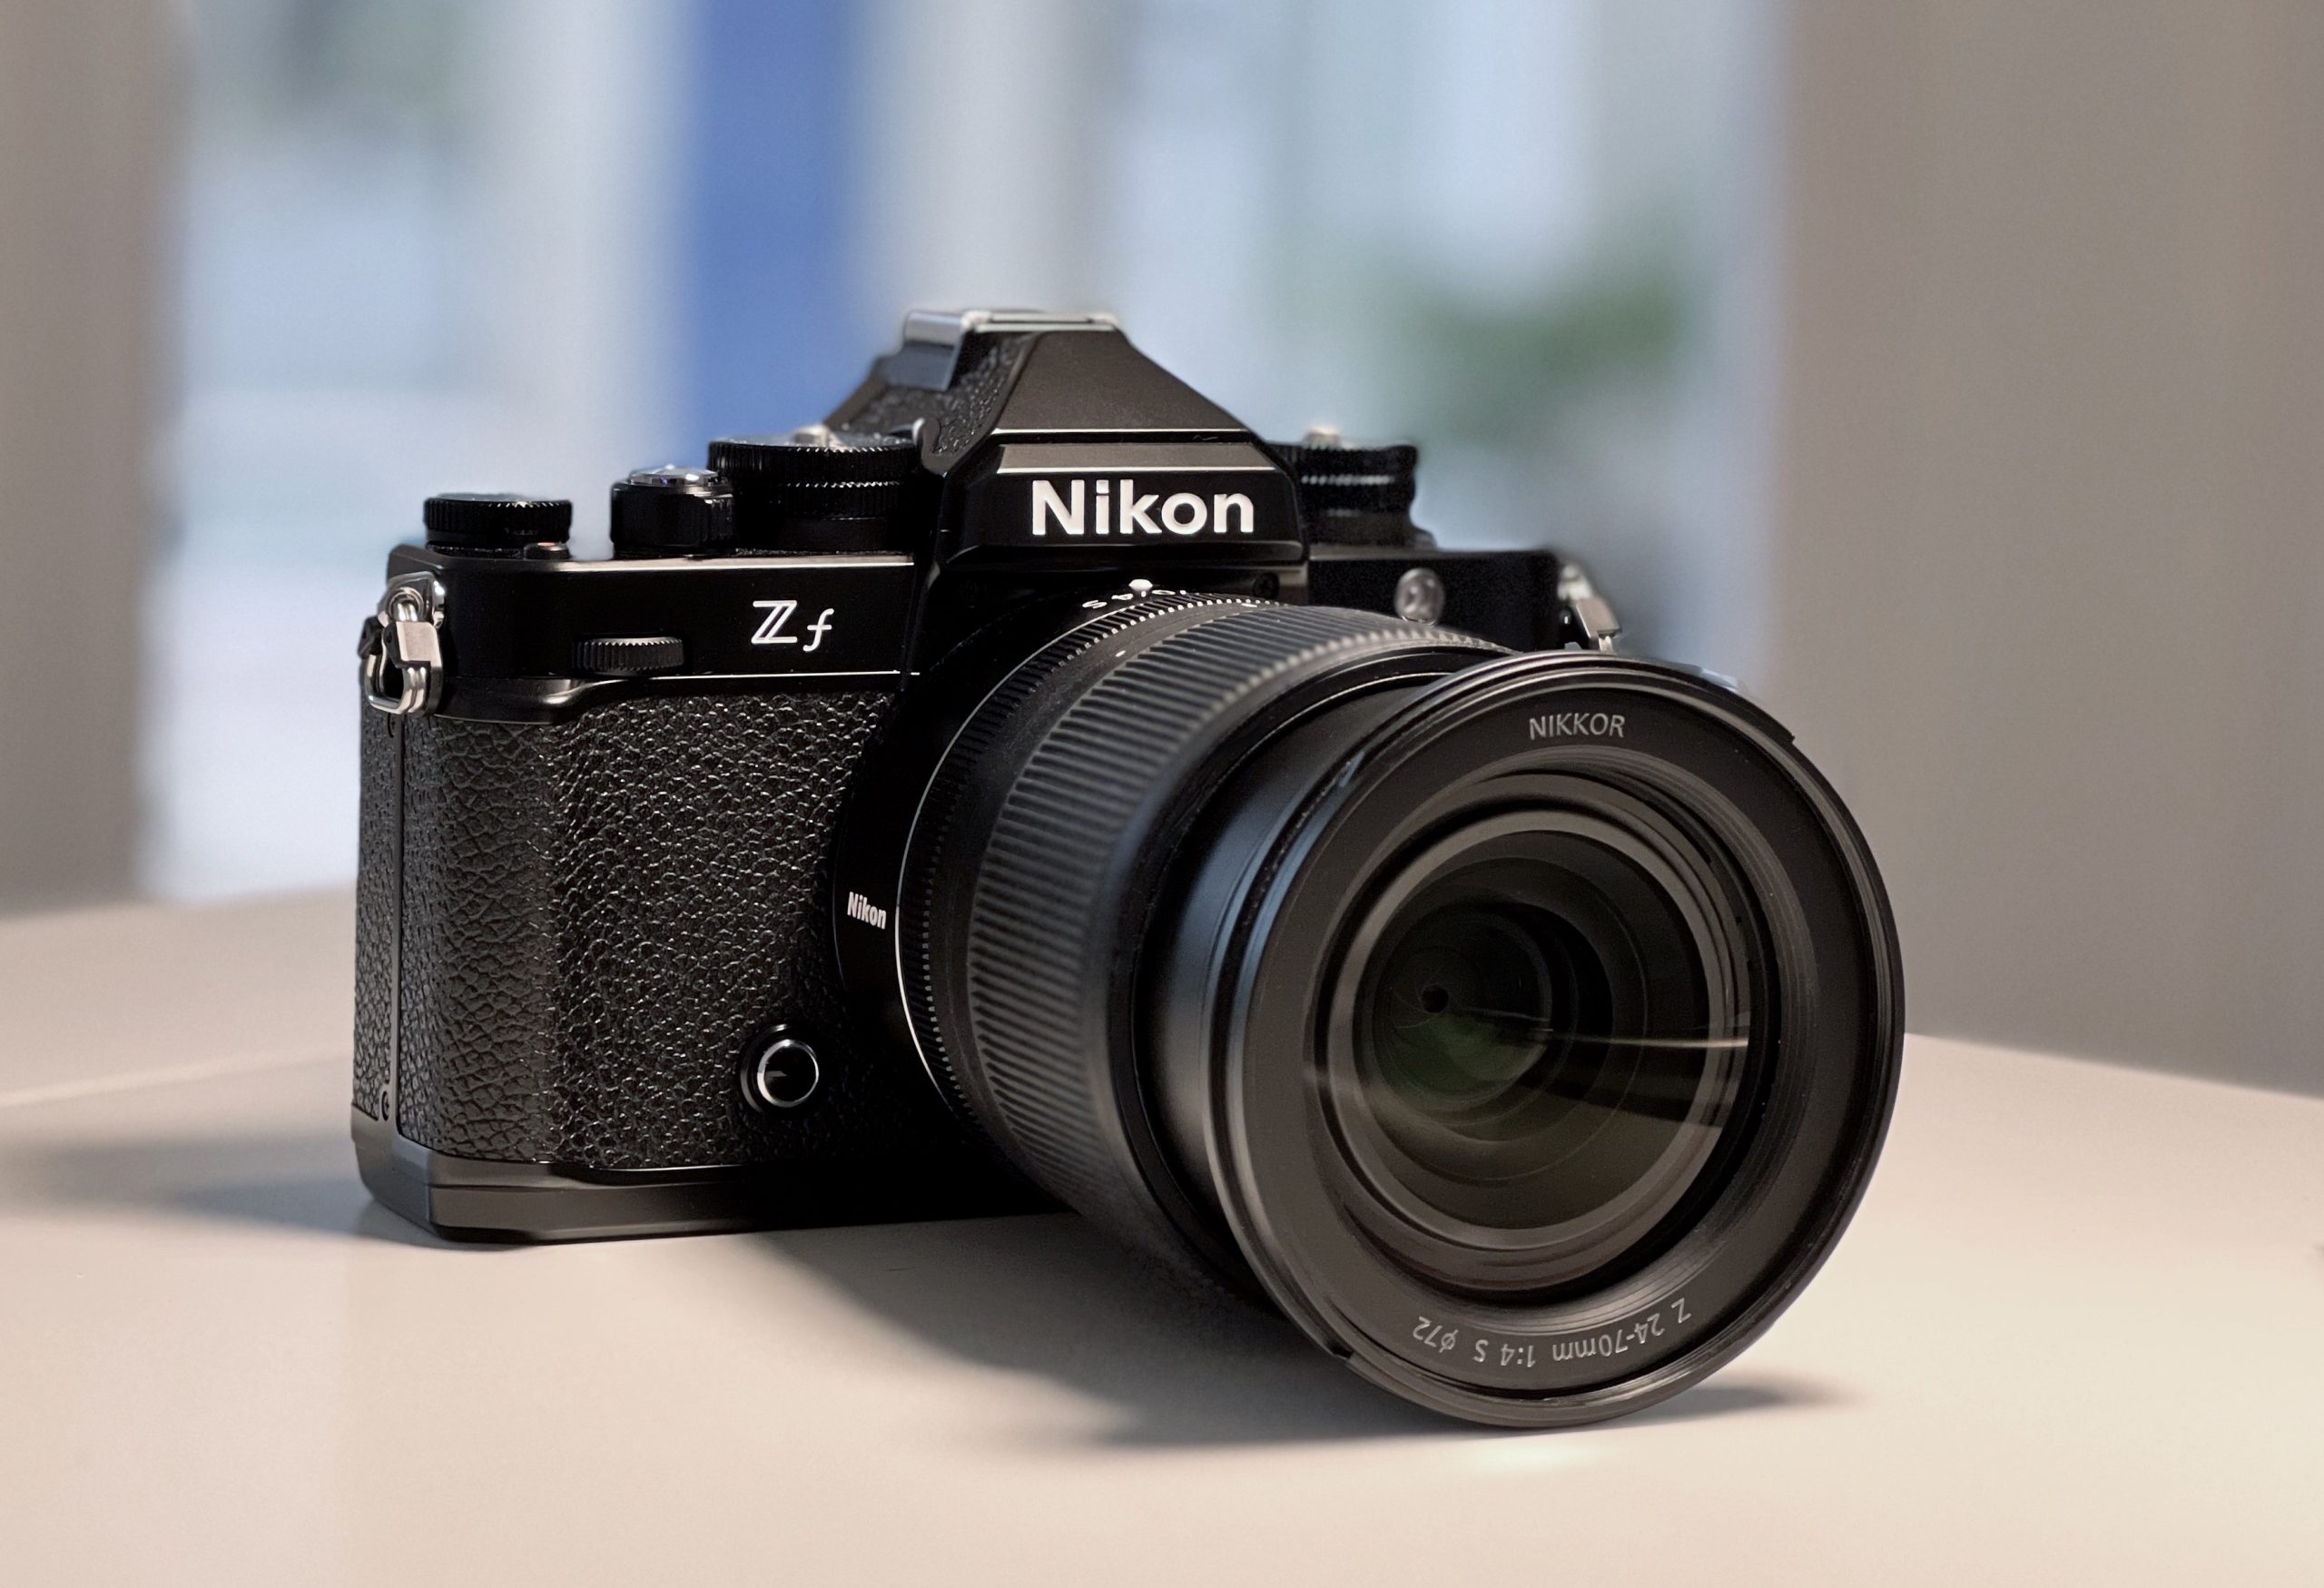 The 8 Most Surprising Things About the Nikon Zf